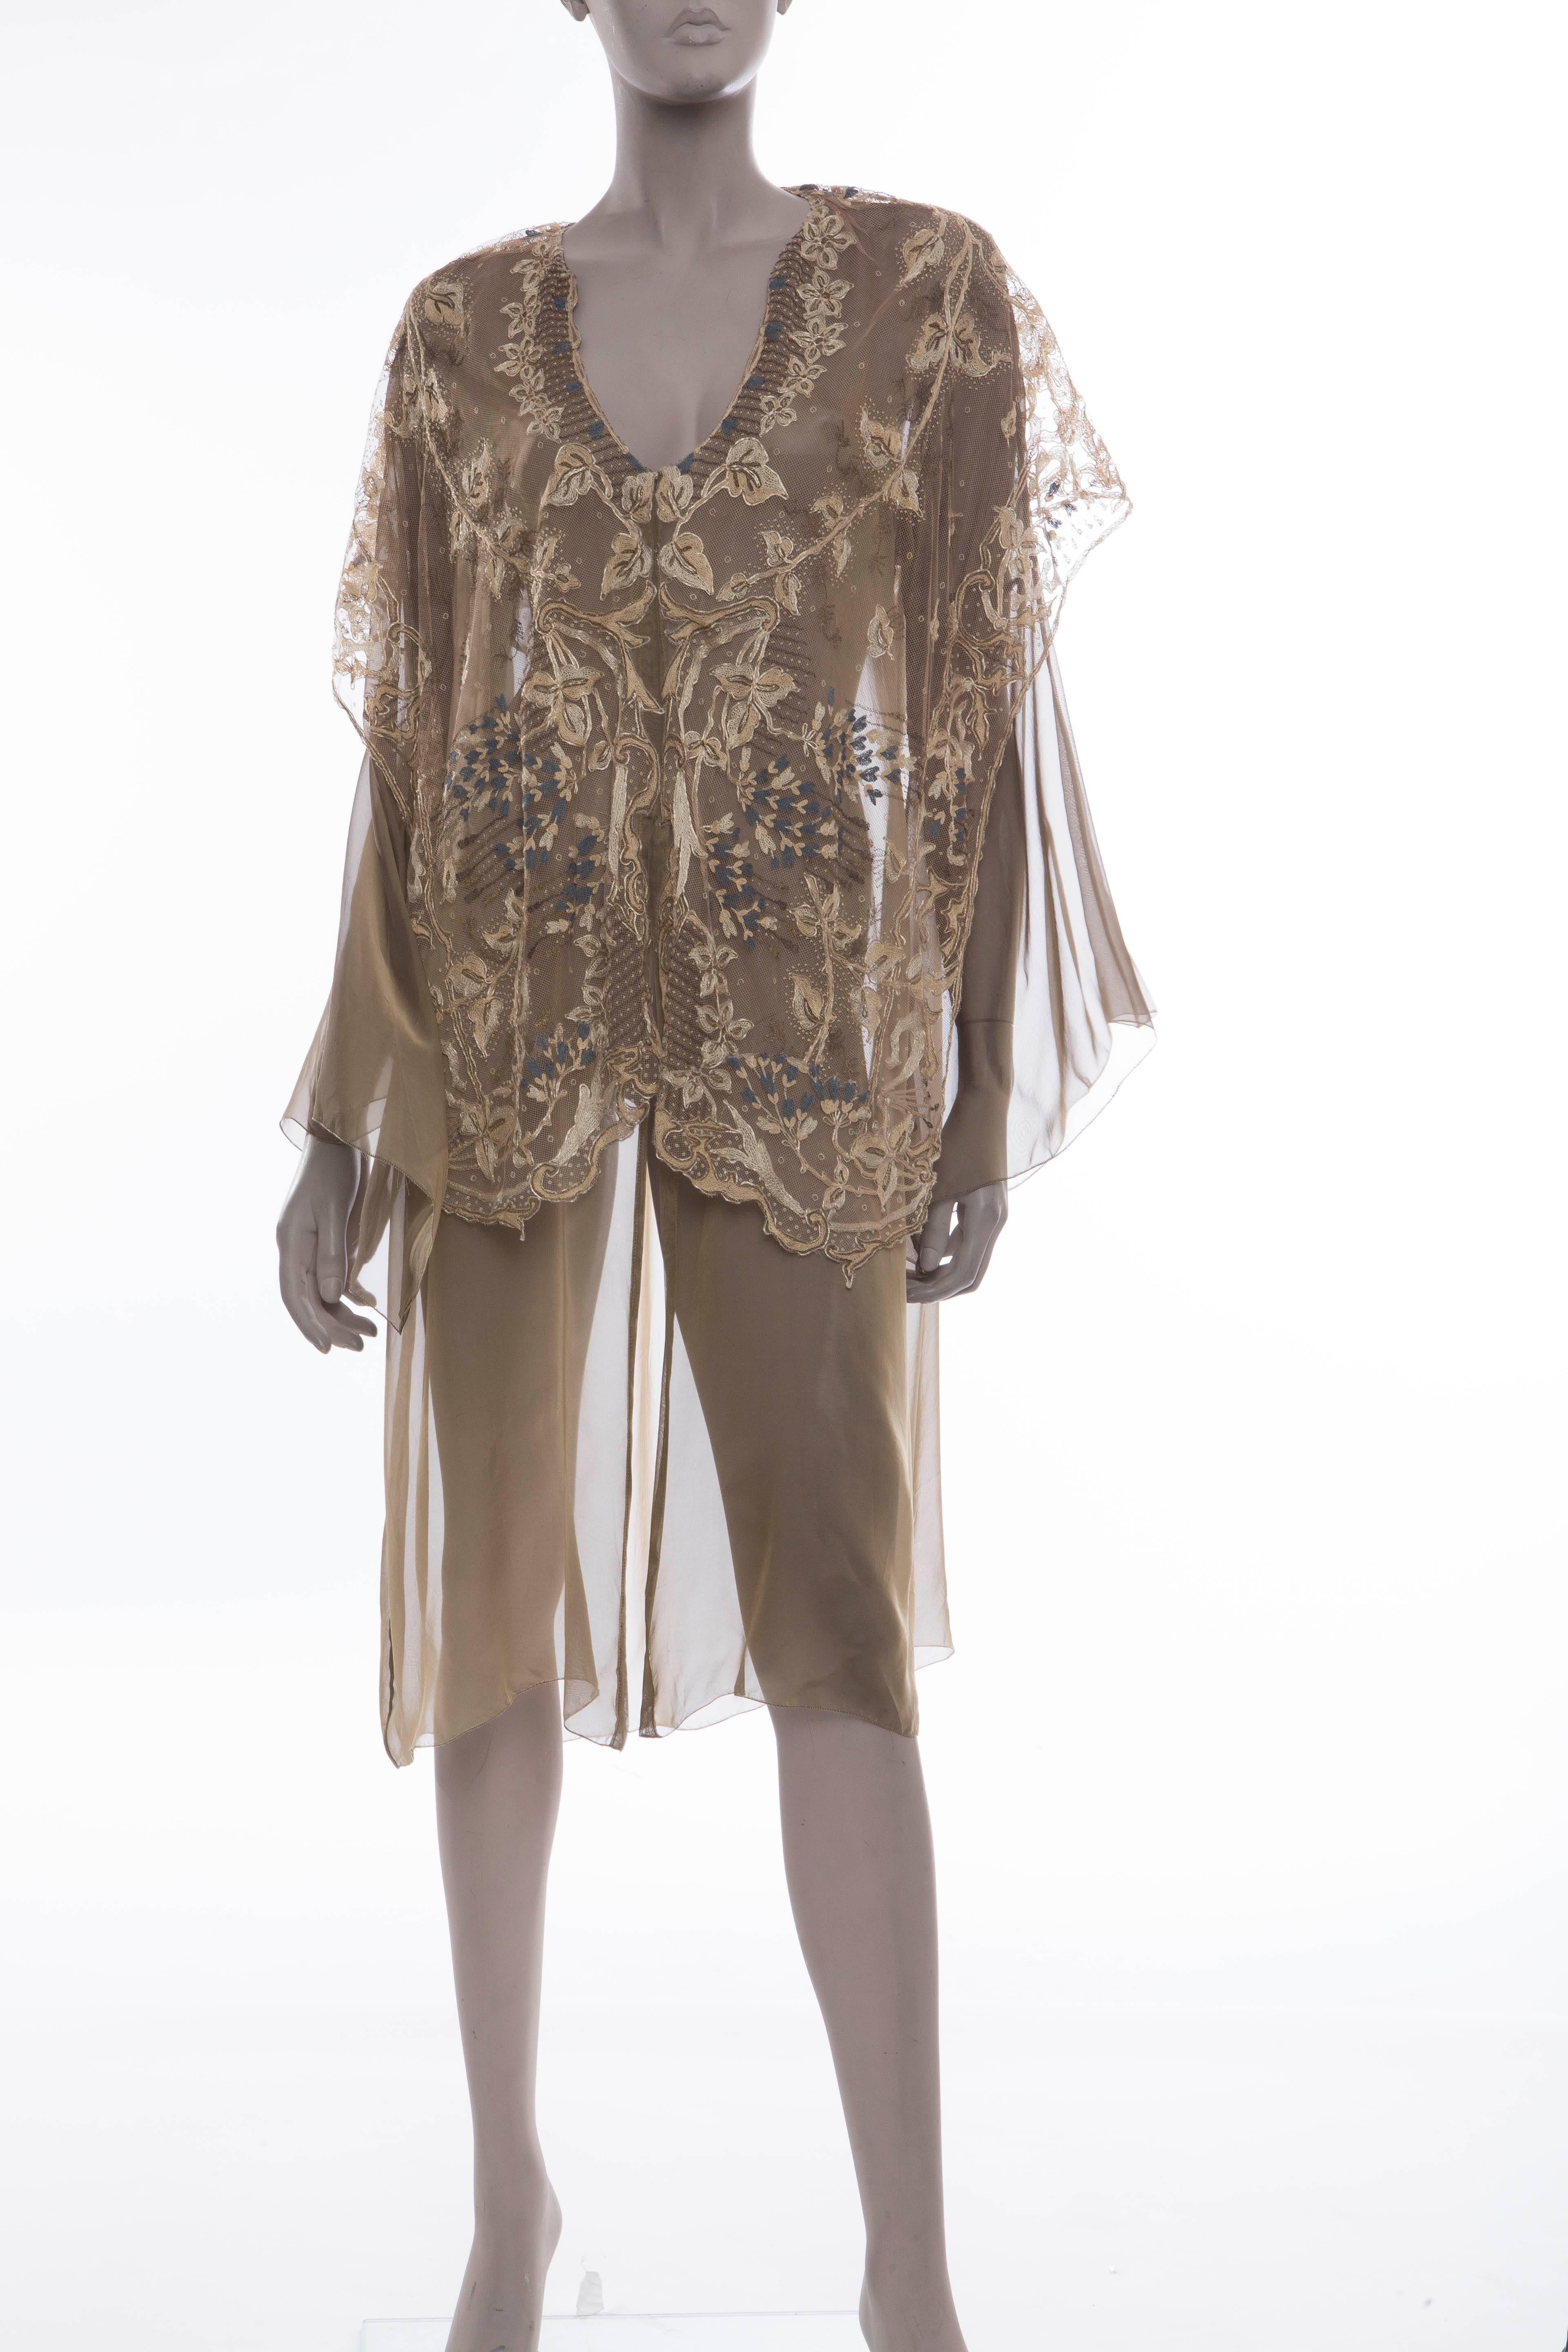 Circa 1930's, silk chiffon, jacket with floral lace collar with hook and eye closure and angel sleeves.